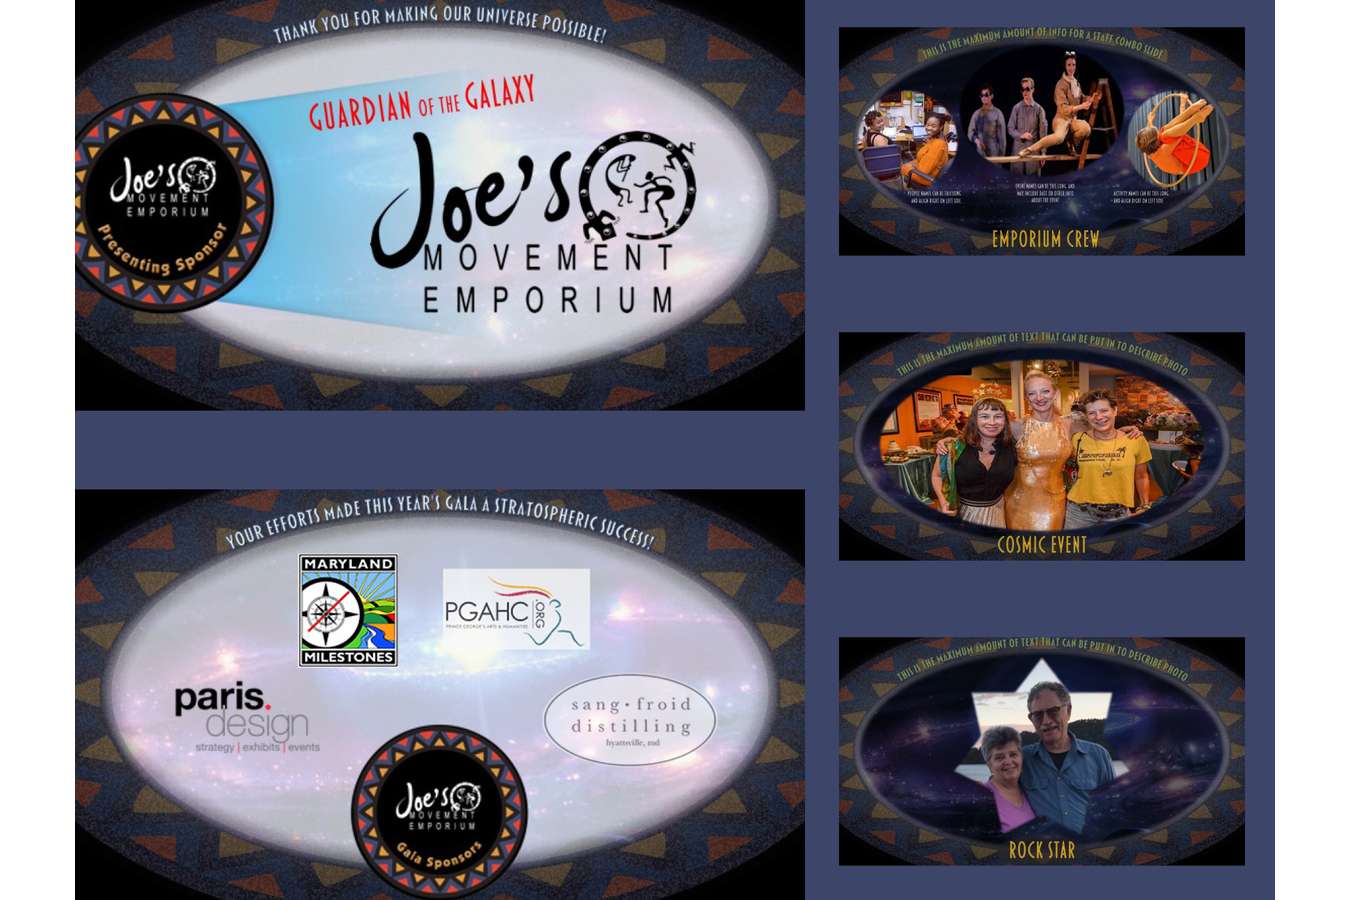 2L-Jglam : Sponsors, donors, staff and special events were all branded thematically in this overhead floating presentation